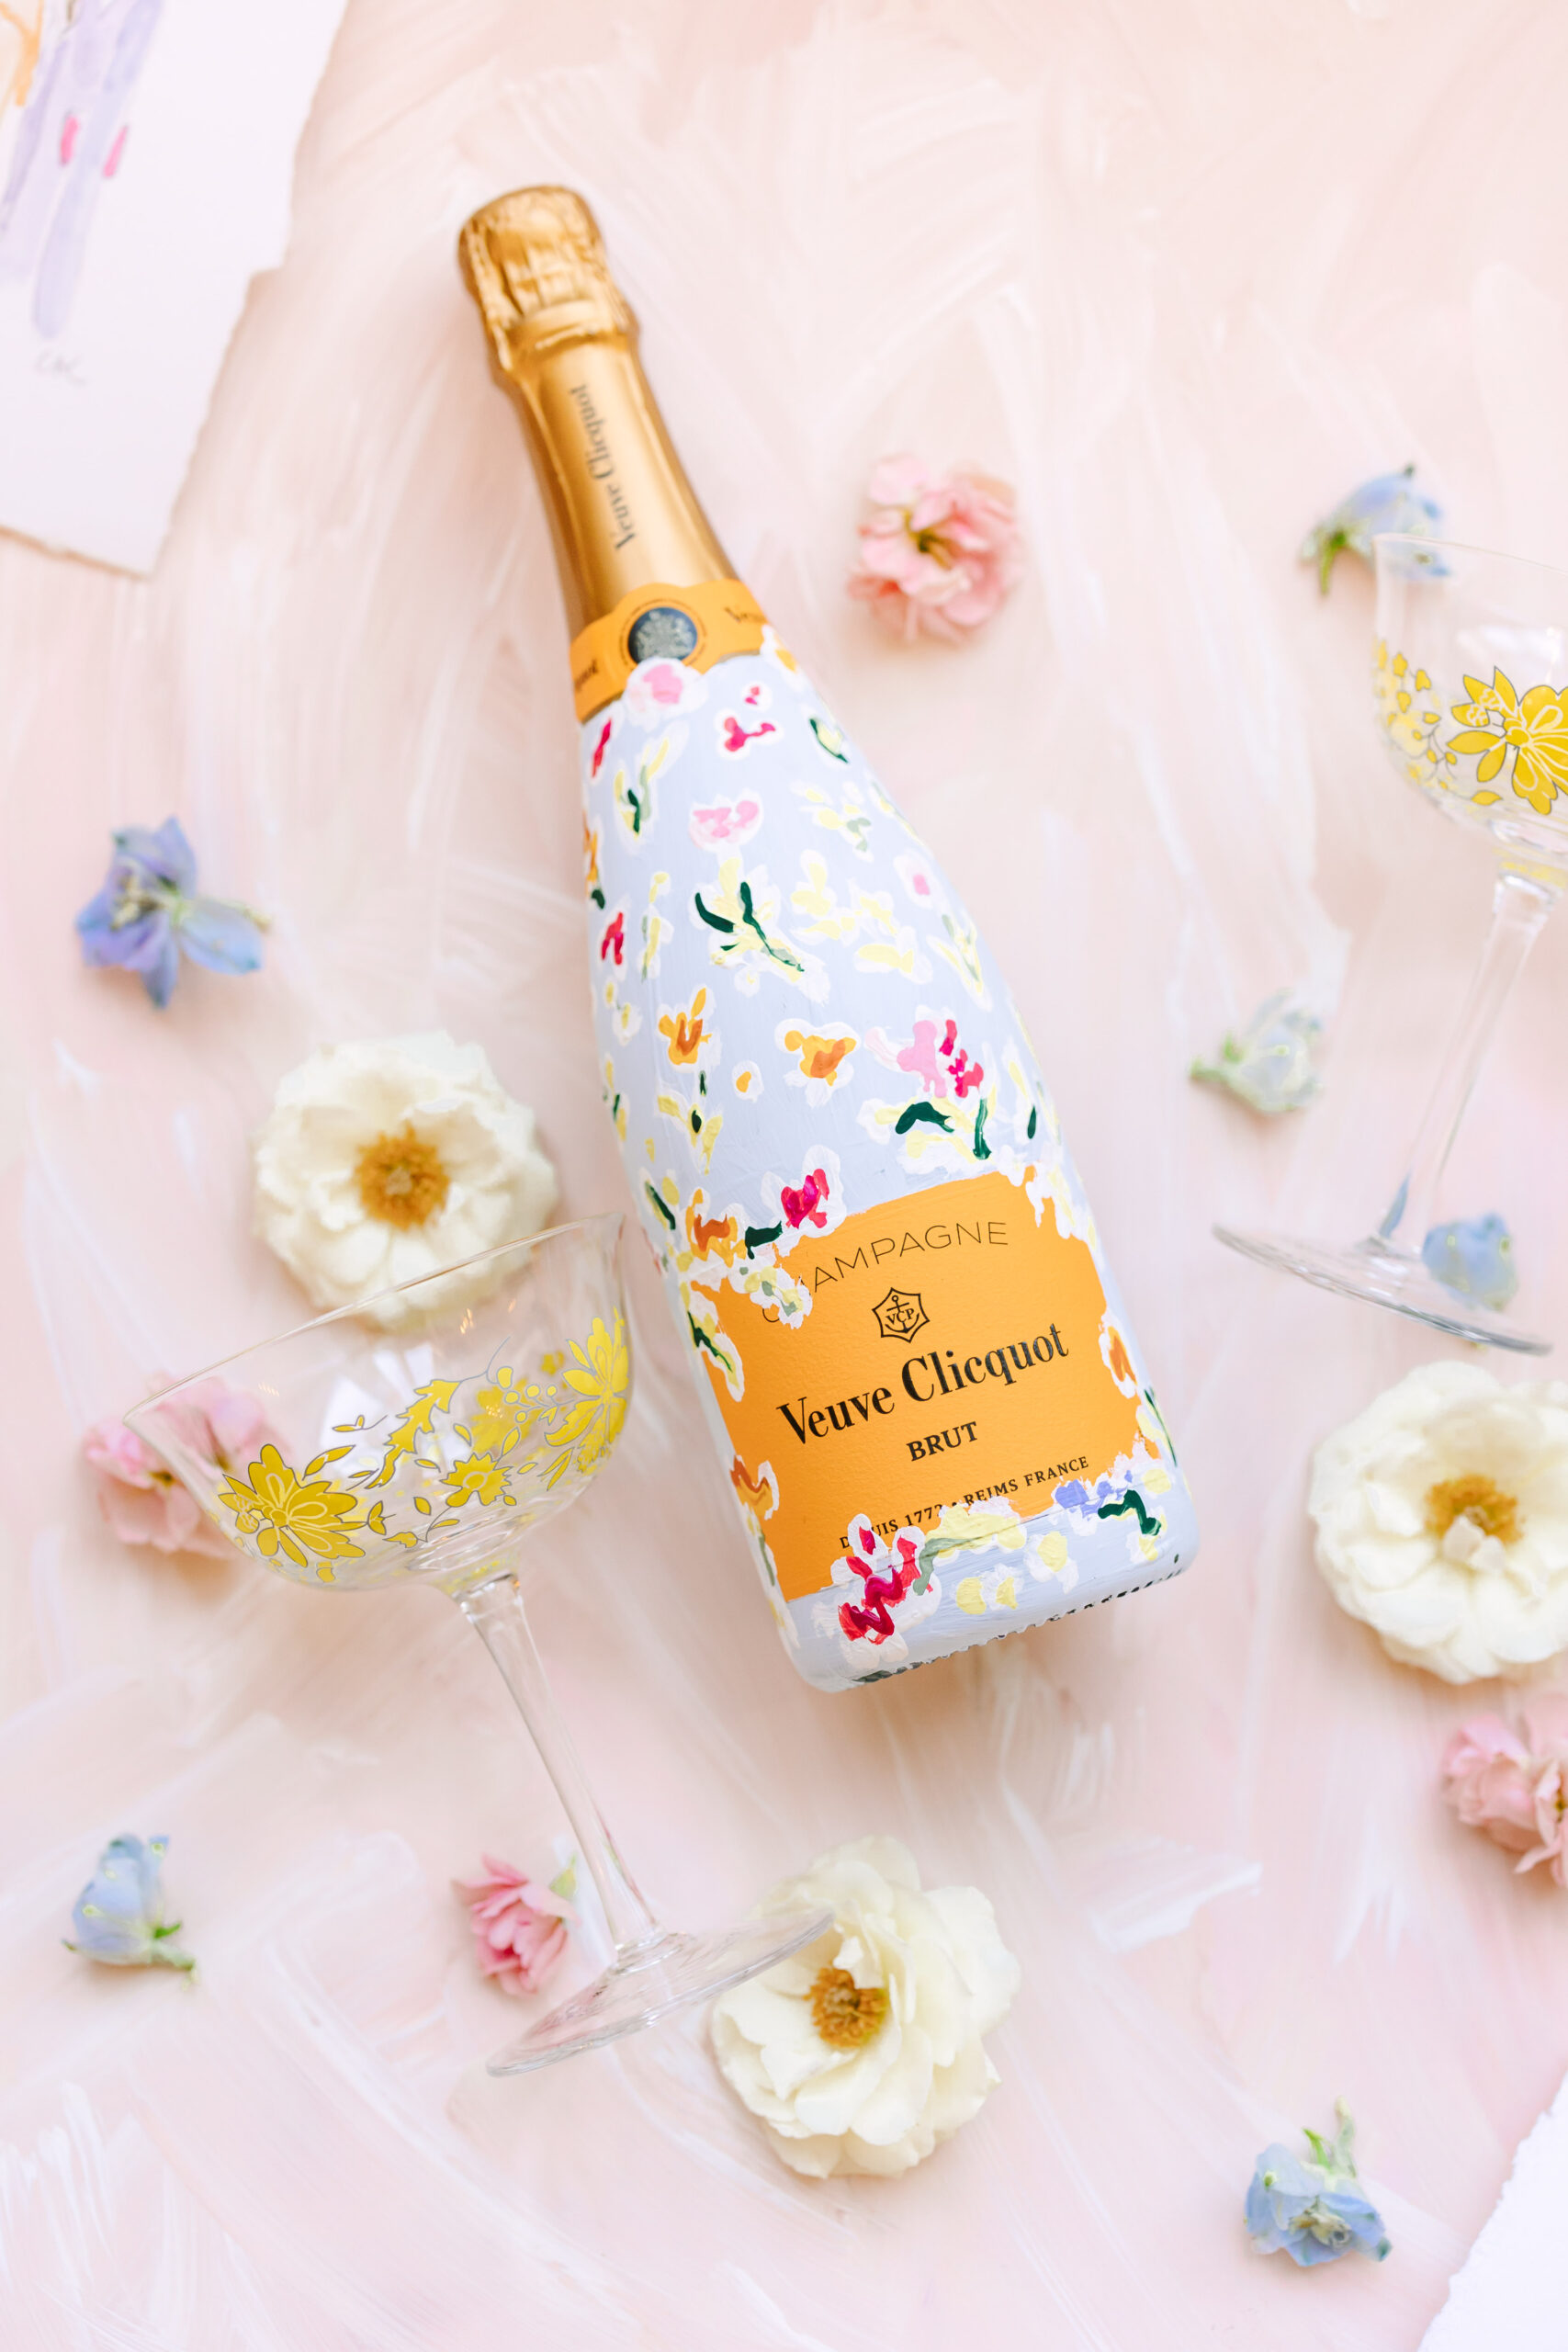 Hand Painted Champagne bottles for guests at destination wedding